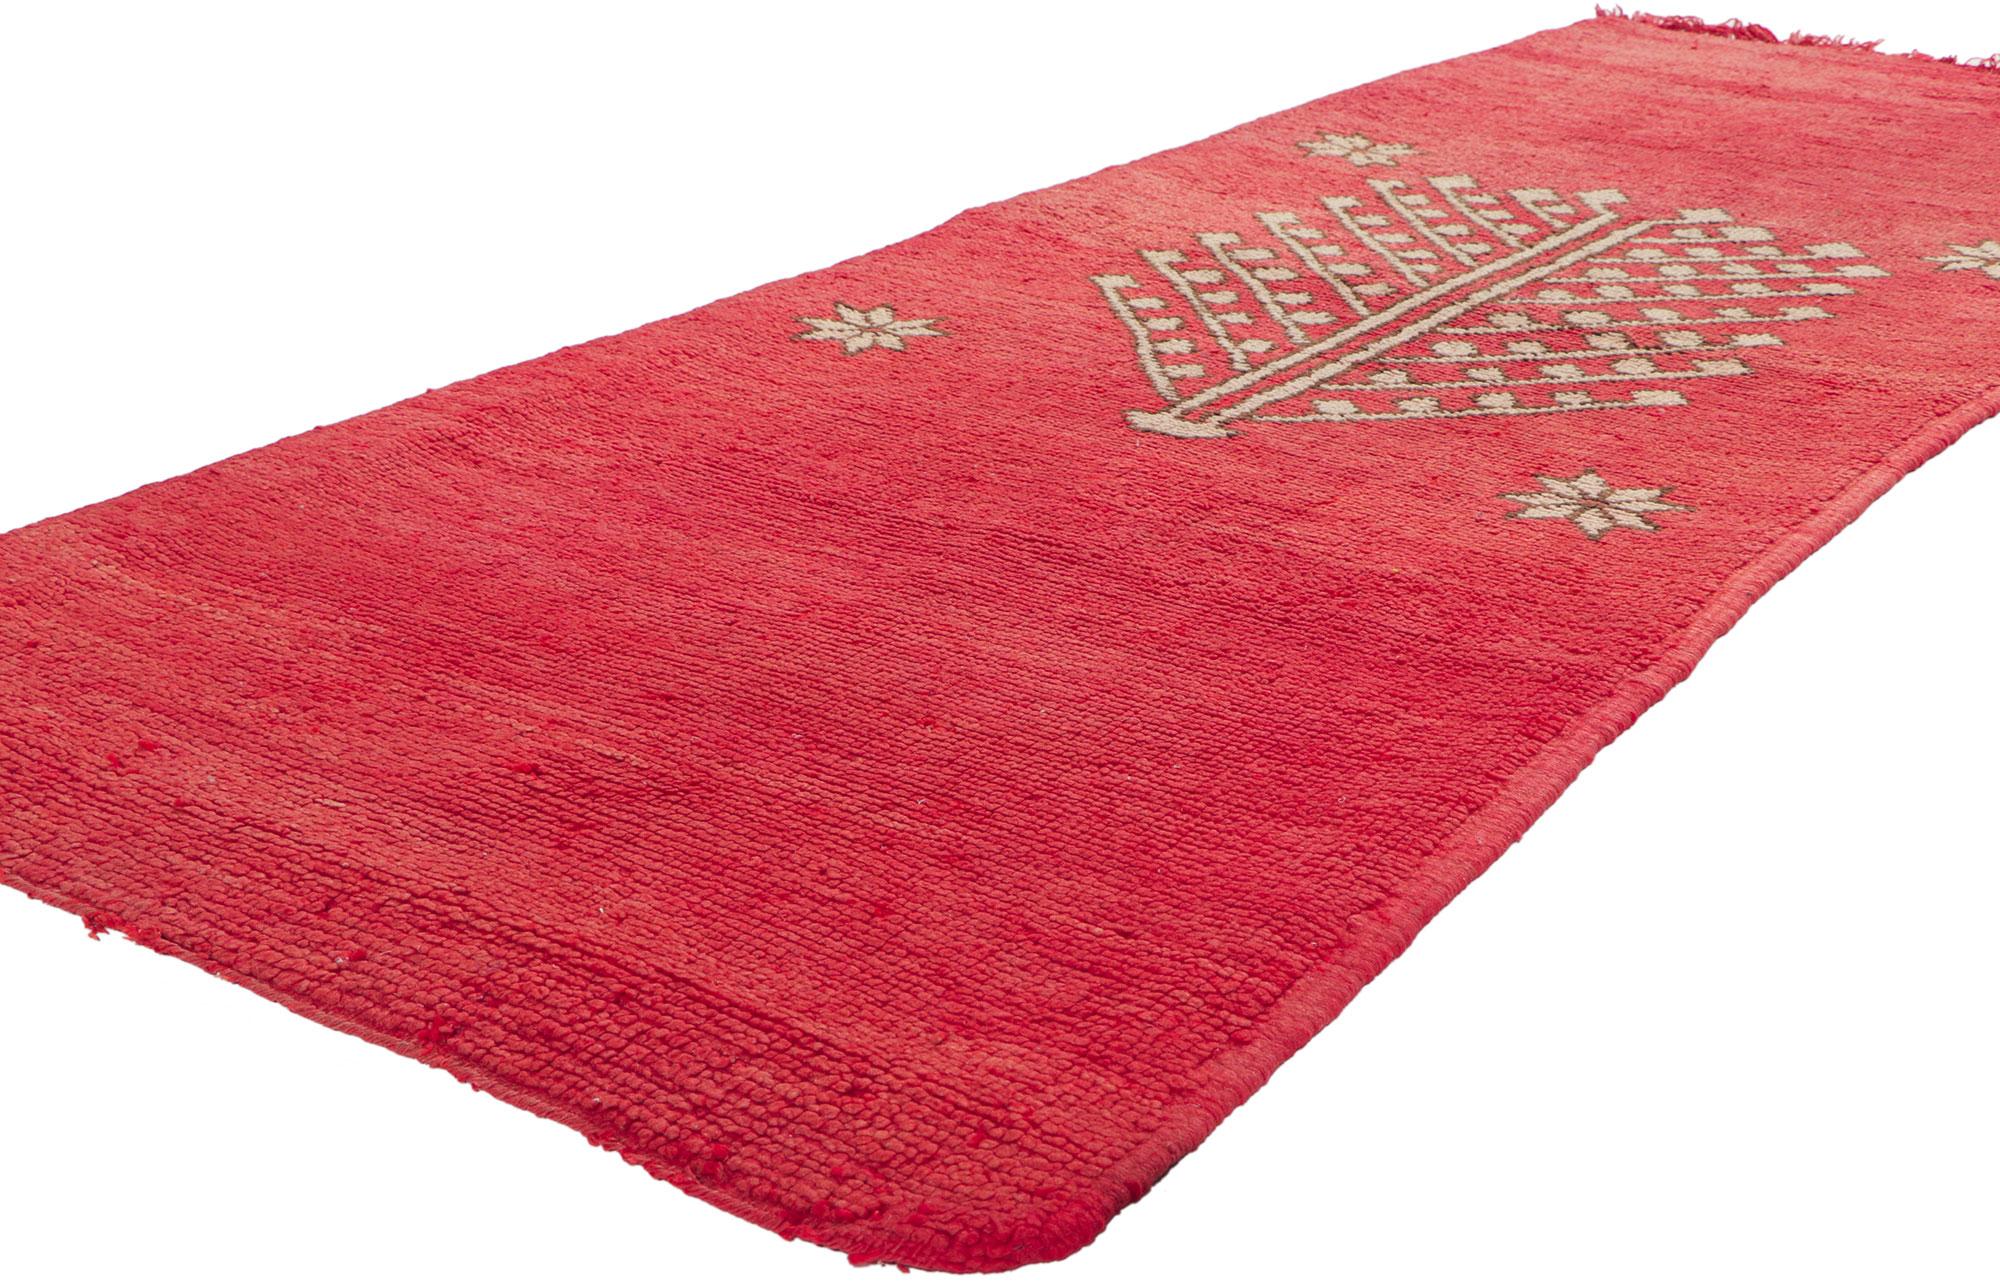 ?78405 Vintage Berber Moroccan rug with Tree of Life, 03'00 x 08'06. Showcasing an expressive design, incredible detail and texture, this hand knotted wool vintage Berber Moroccan rug is a captivating vision of woven beauty. The eye-catching